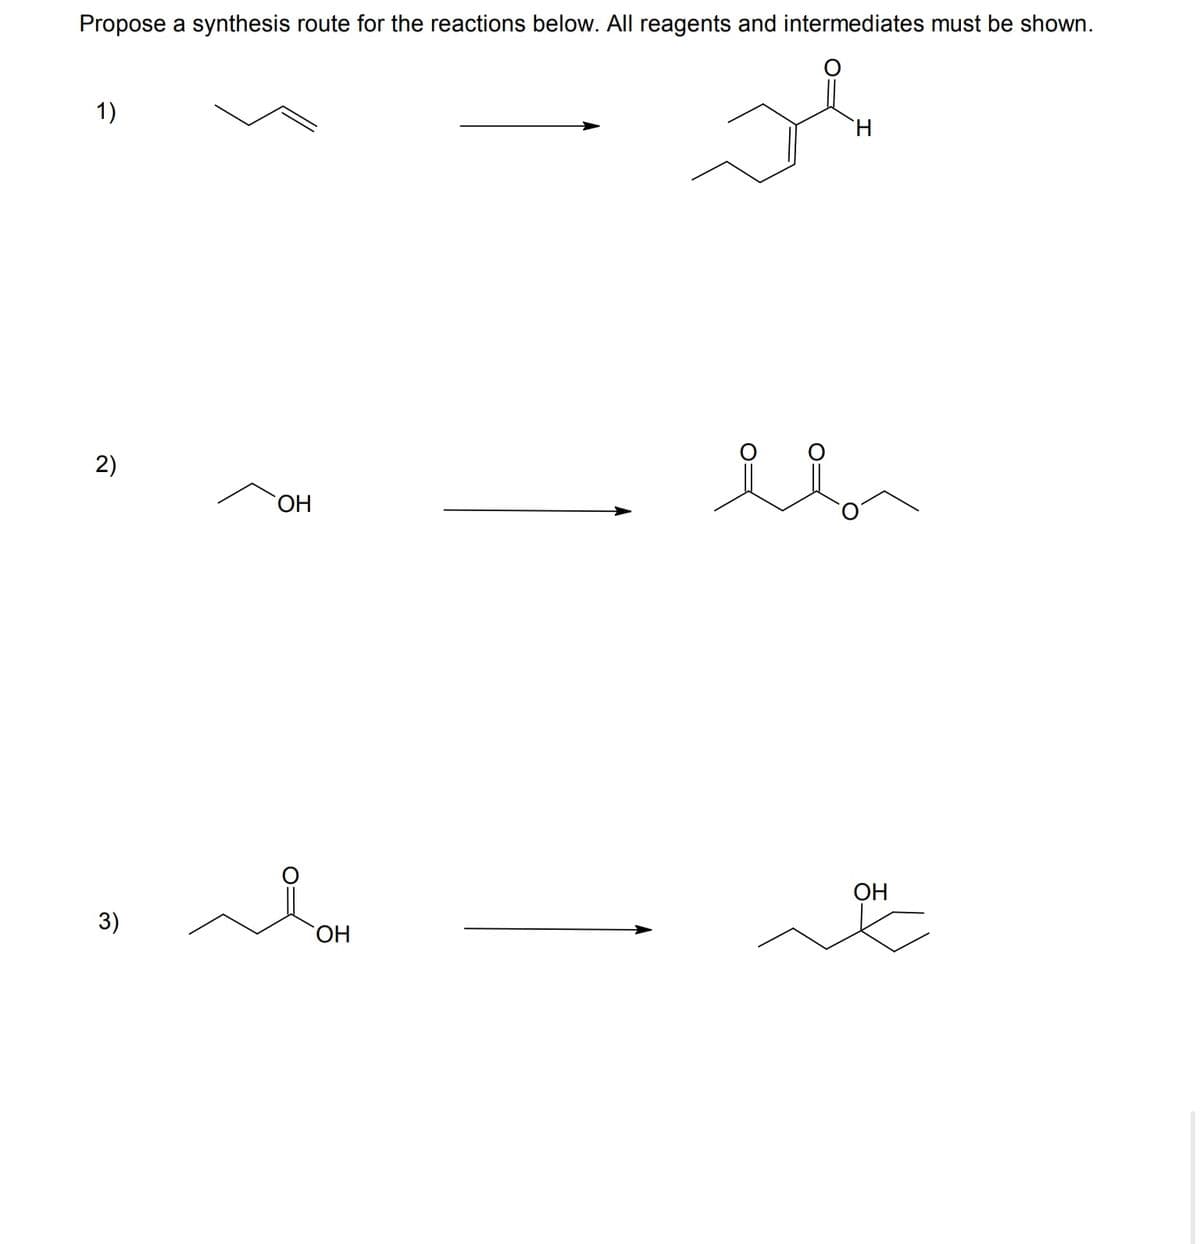 Propose a synthesis route for the reactions below. All reagents and intermediates must be shown.
1)
2)
OH
3)
OH
H
lin
OH